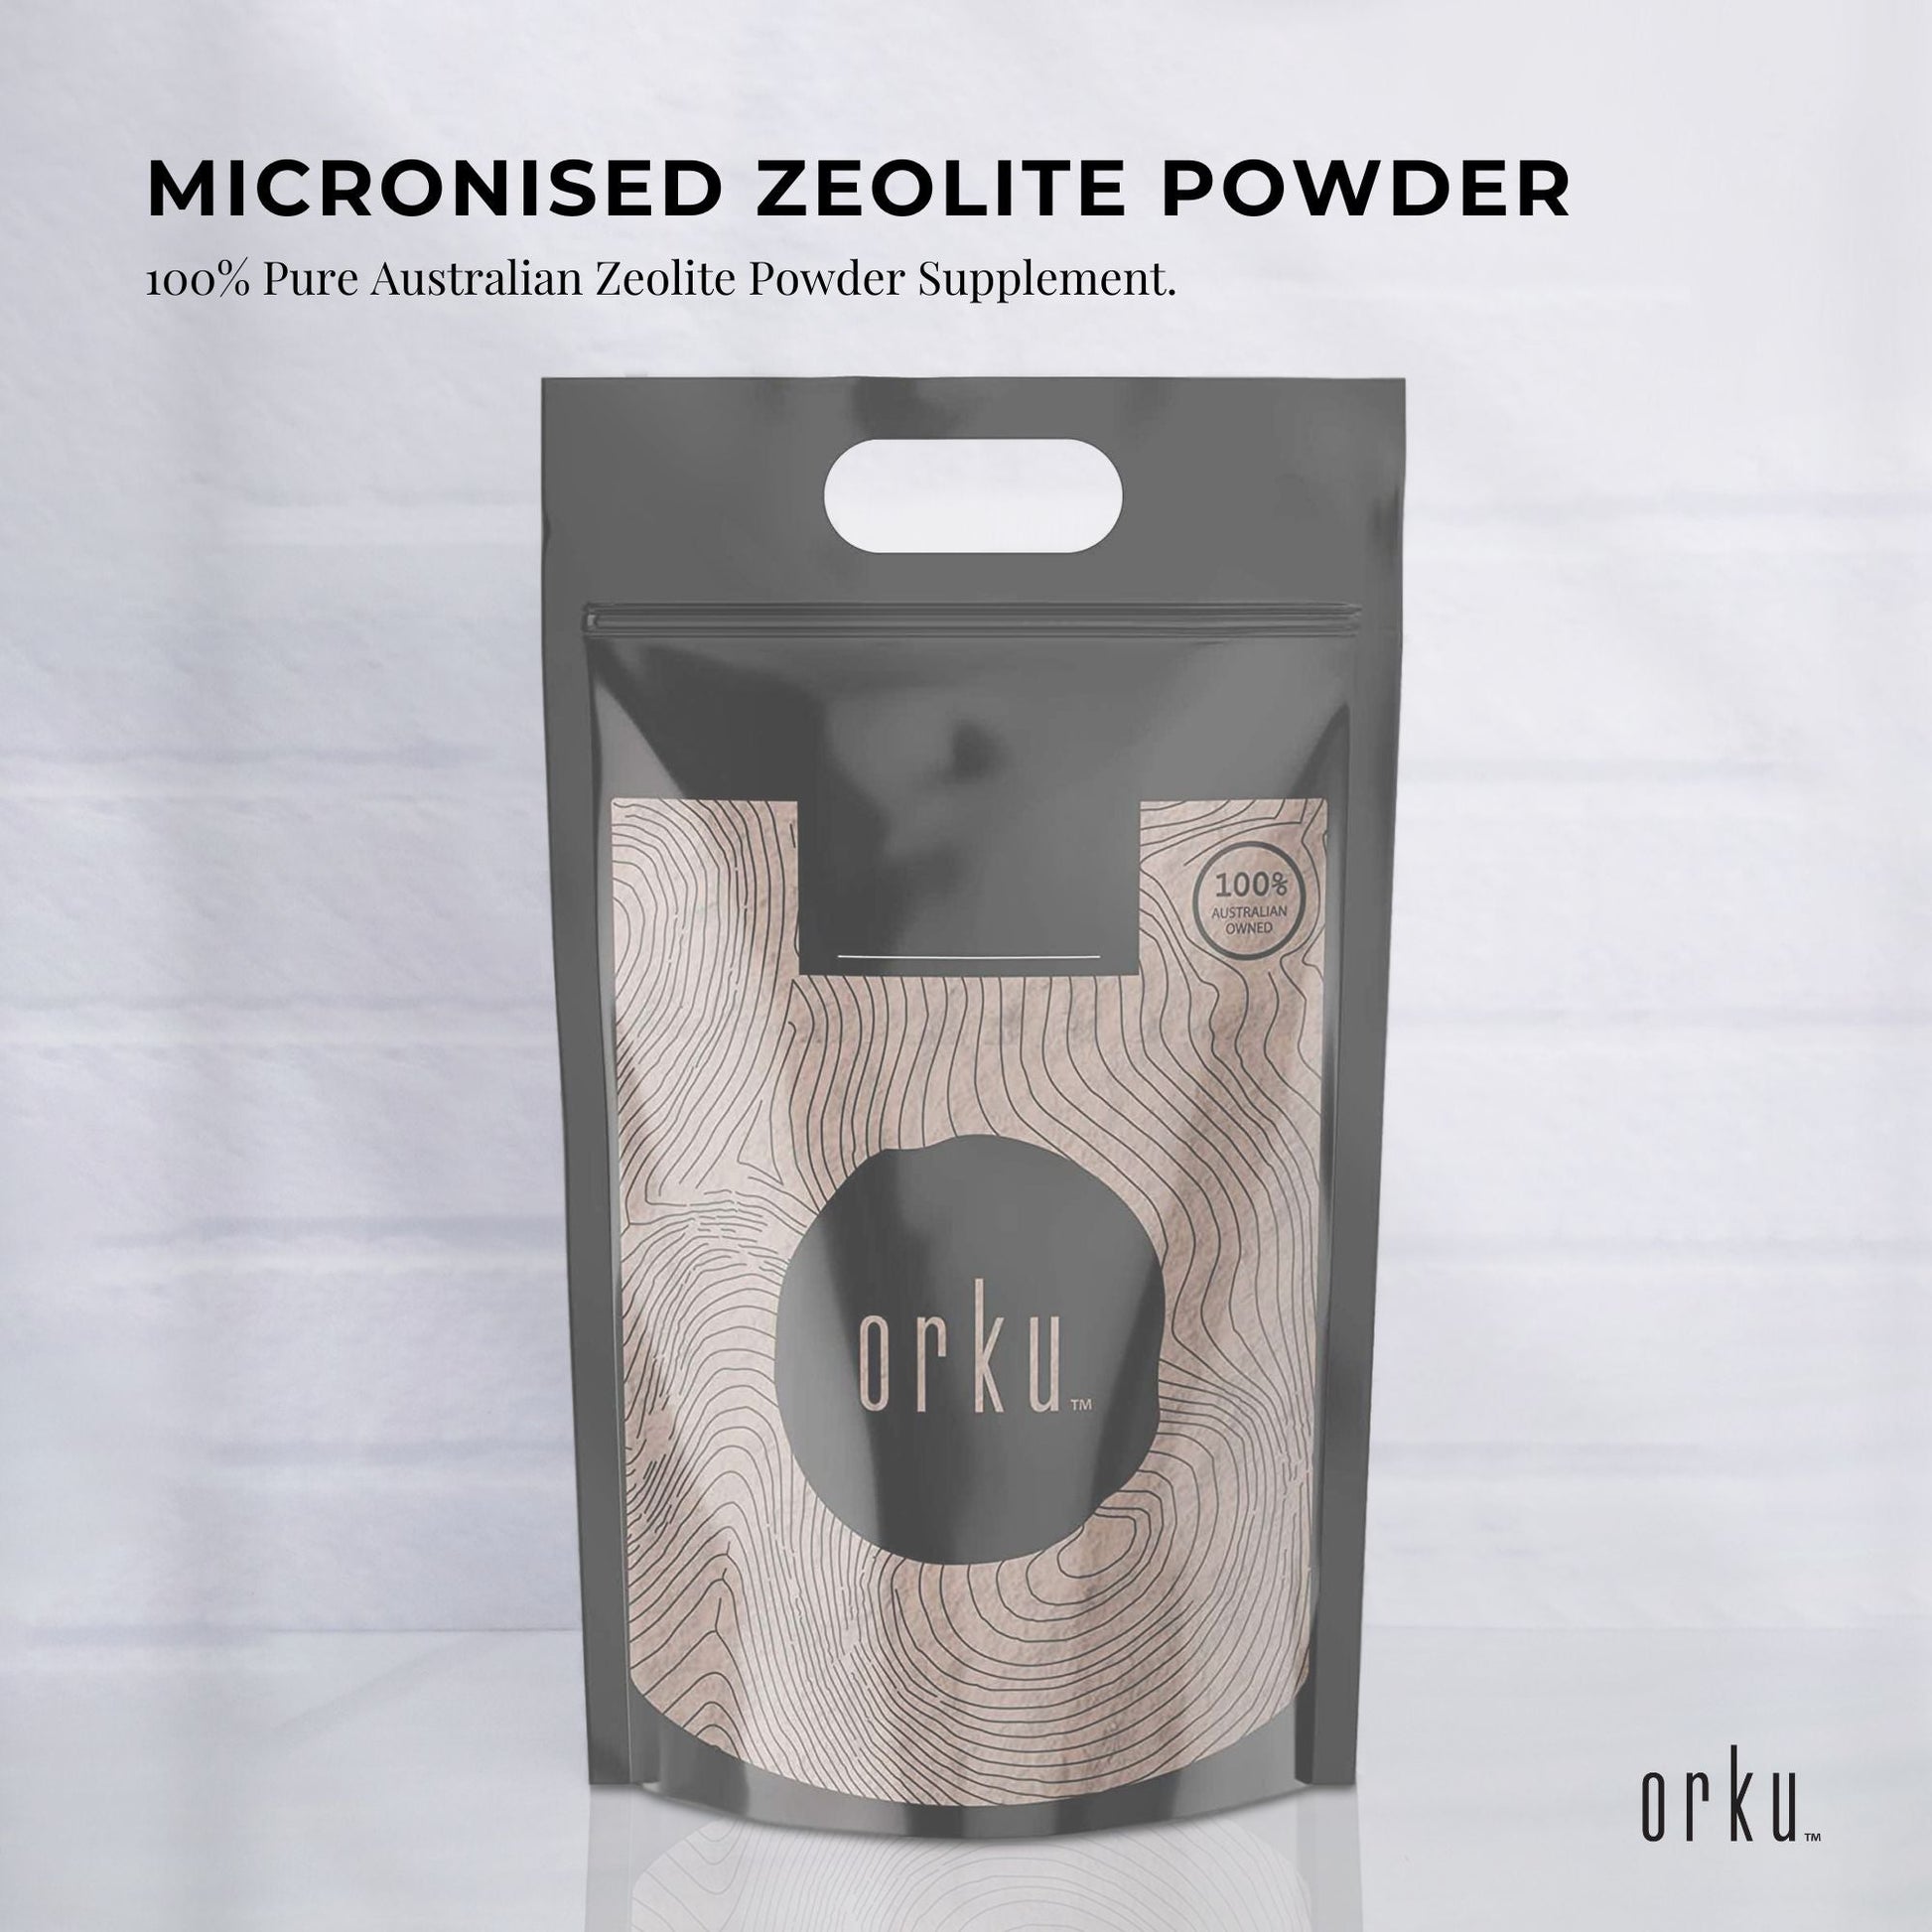 20Kg Pure Micronised Zeolite Powder Supplement Micronized Volcamin